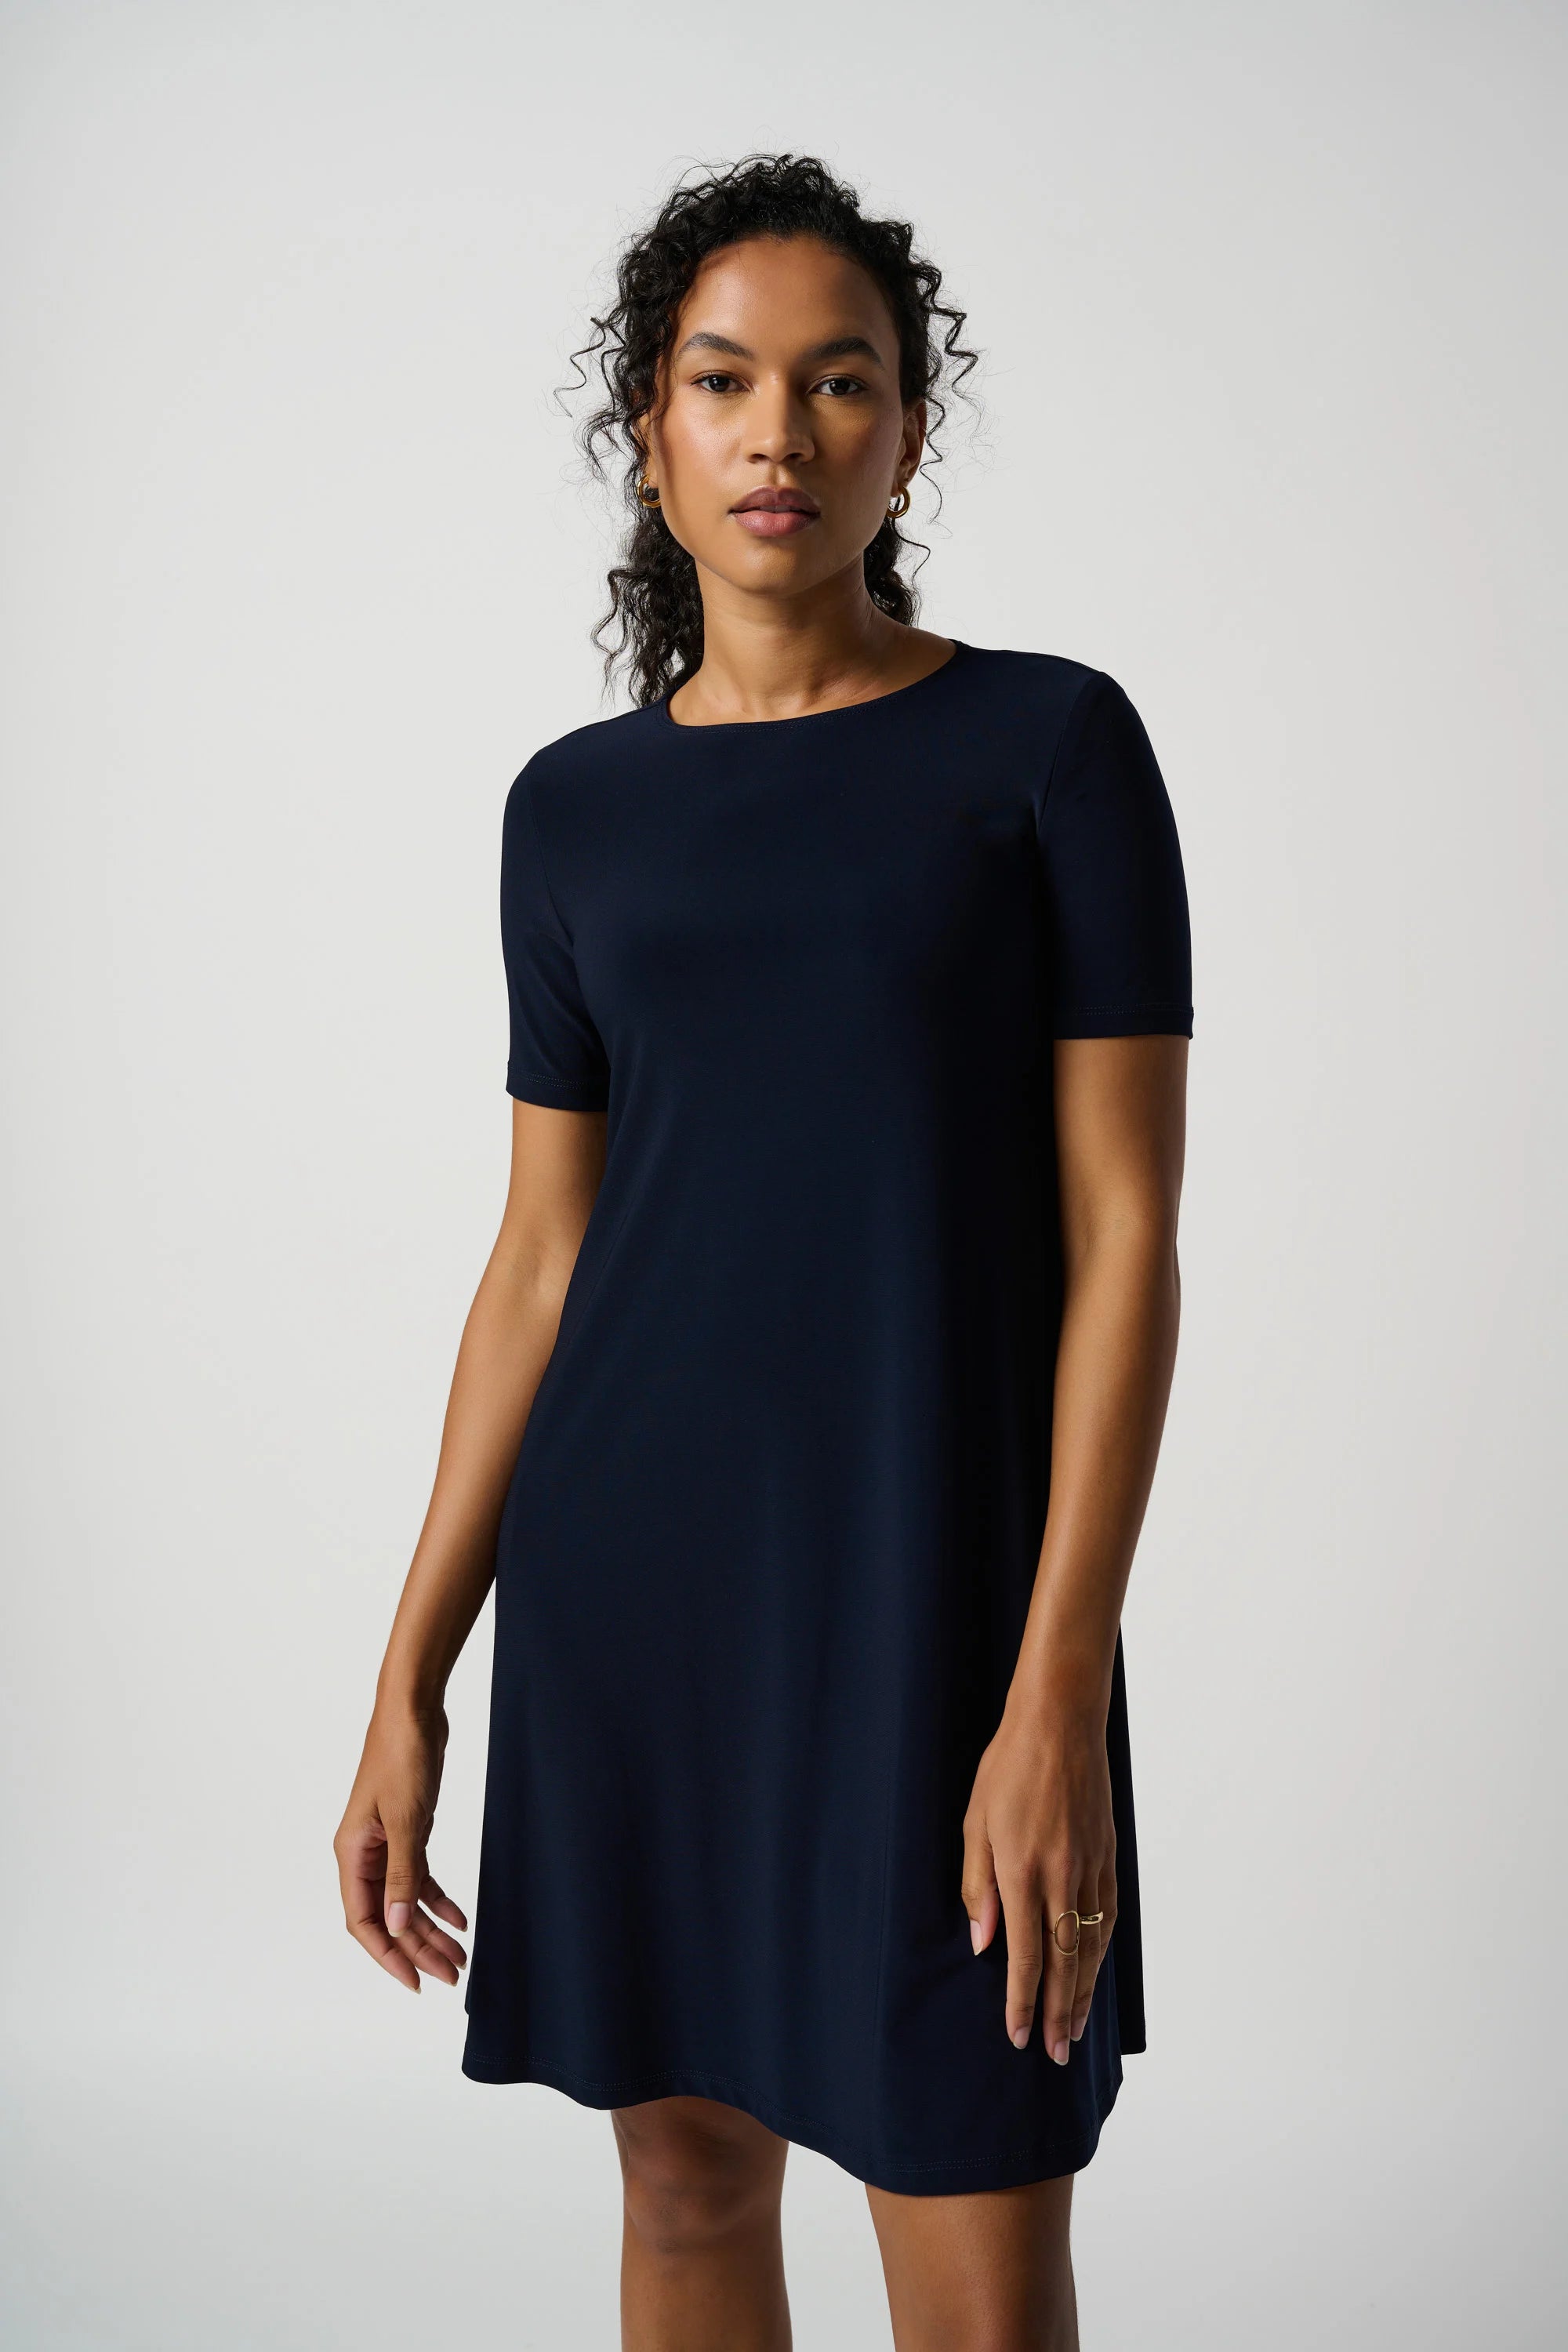 Joseph Ribkoff (202130NOS) Short Sleeve Classic A-Line Dress - Above the Knee Length in Midnight Blue